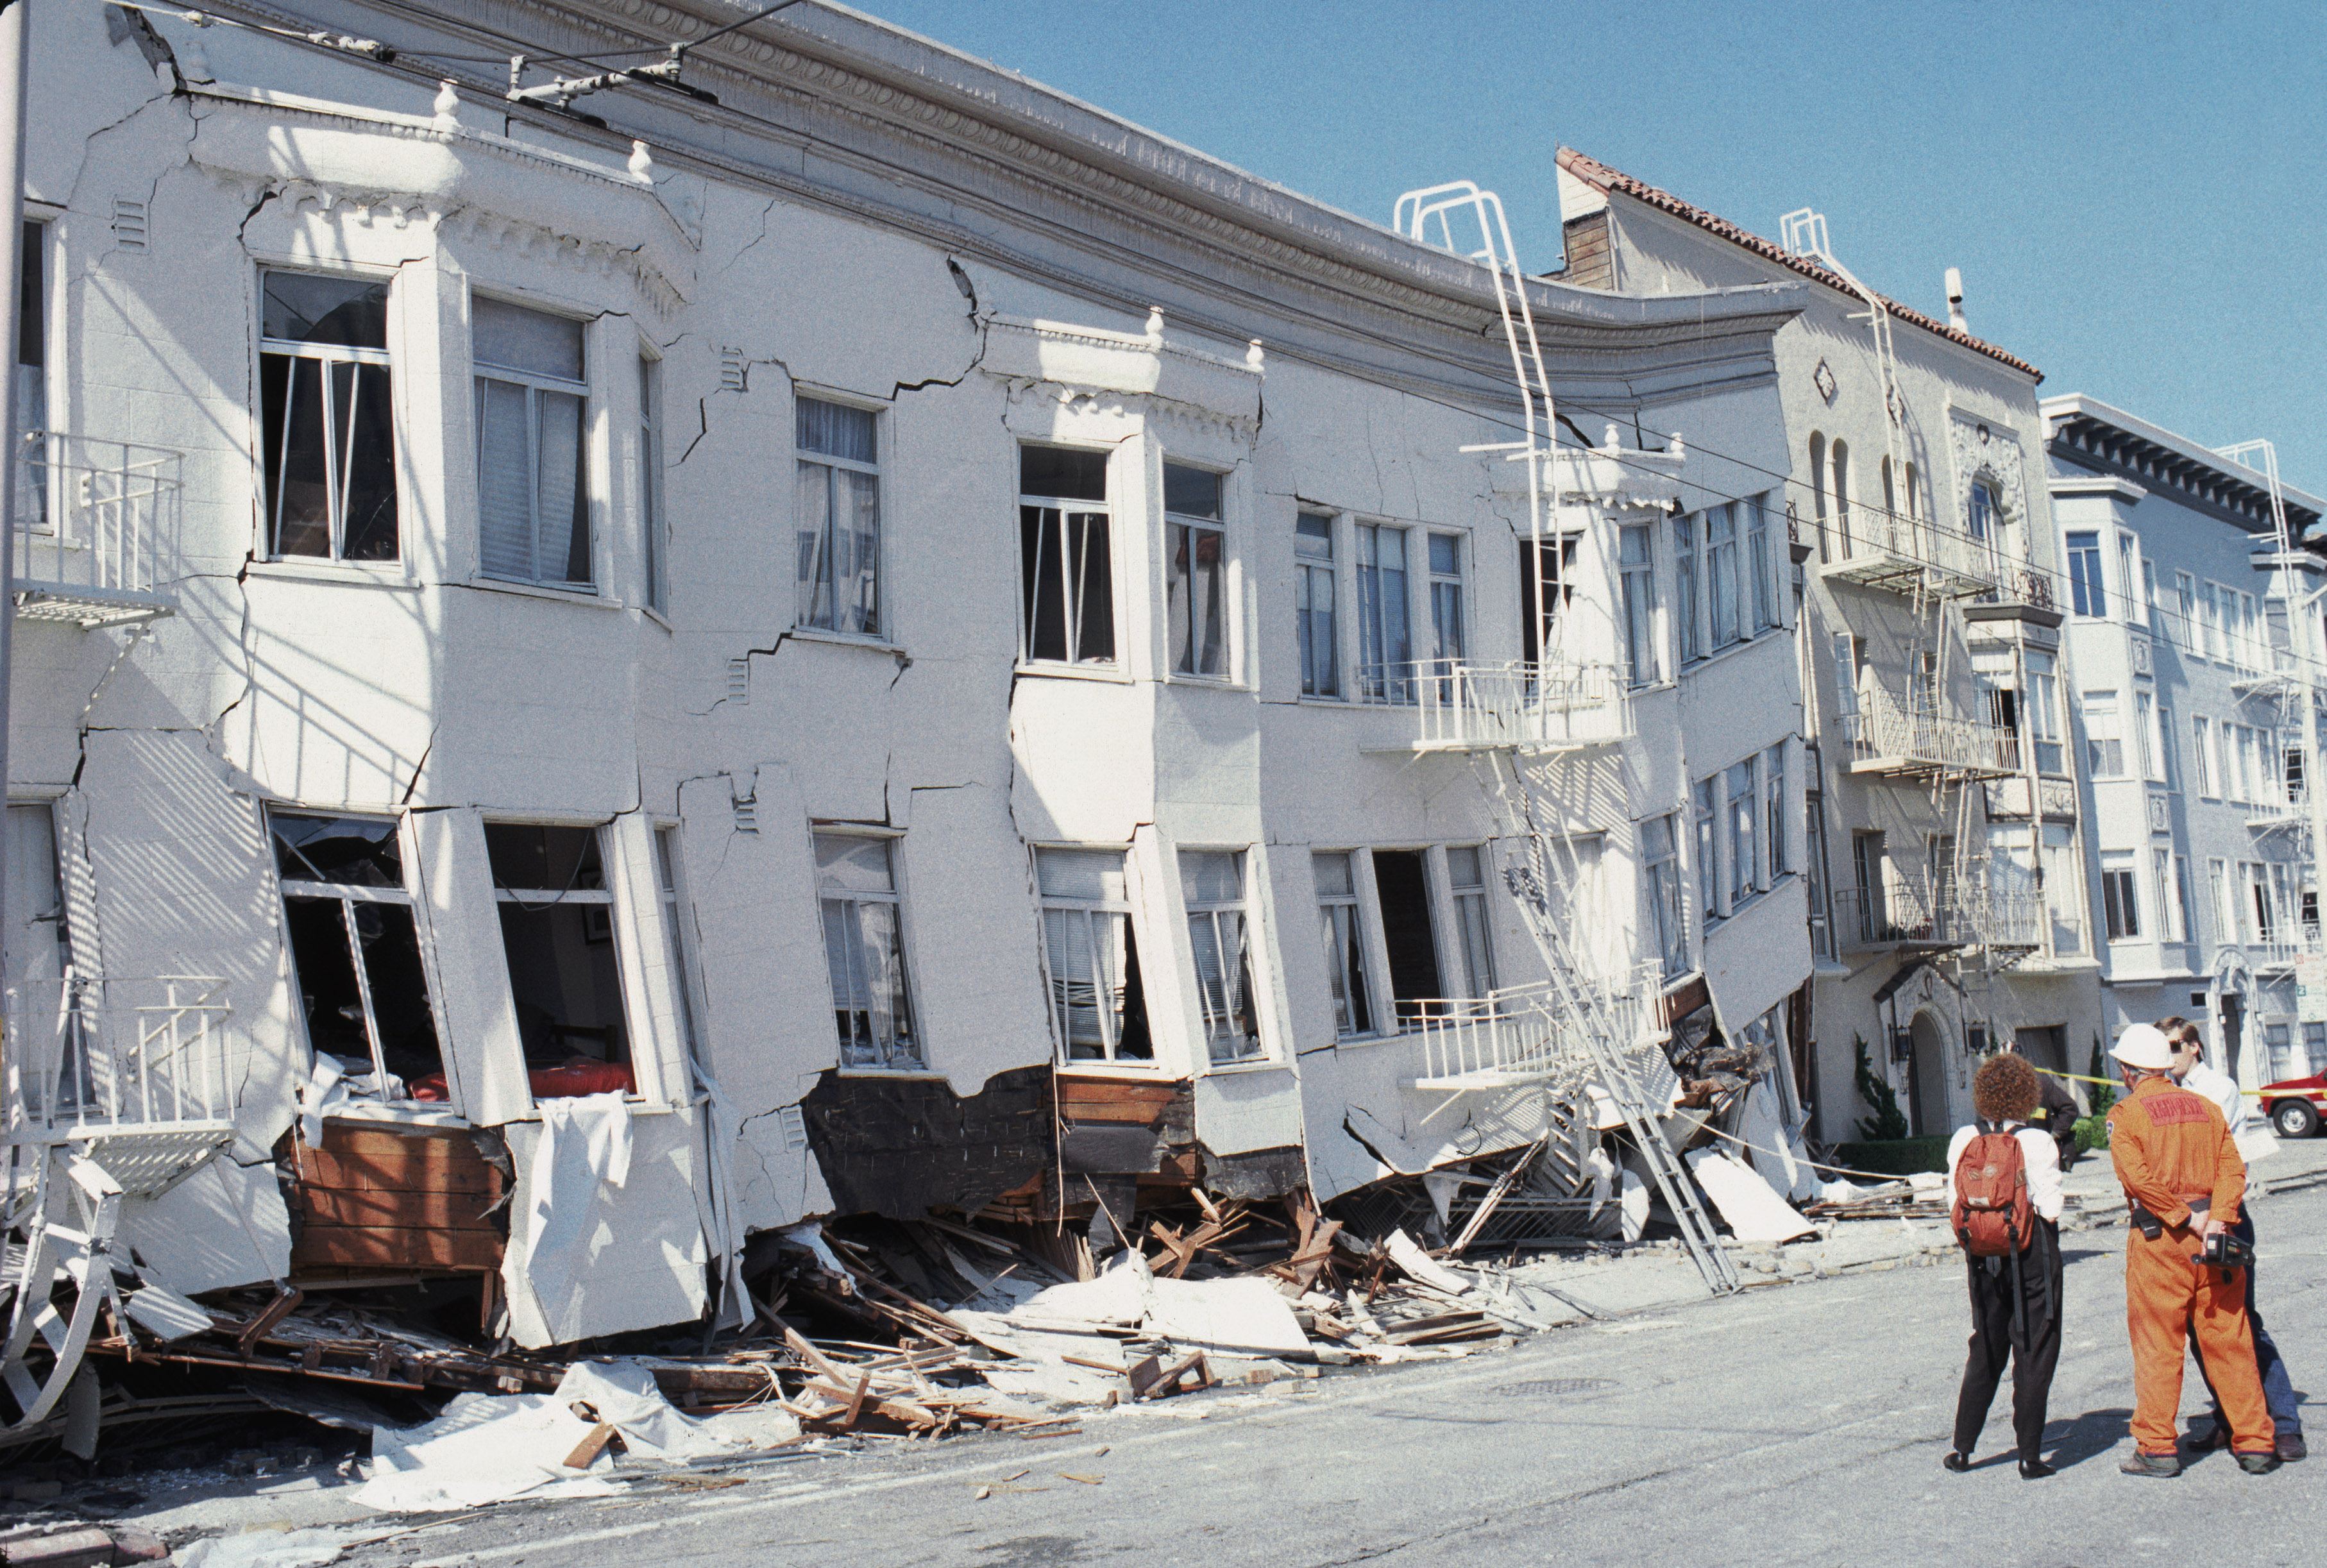 The Marina district disaster zone after an earthquake, measuring 7.1 on the richter scale on Oct. 17, 1989 in San Francisco.